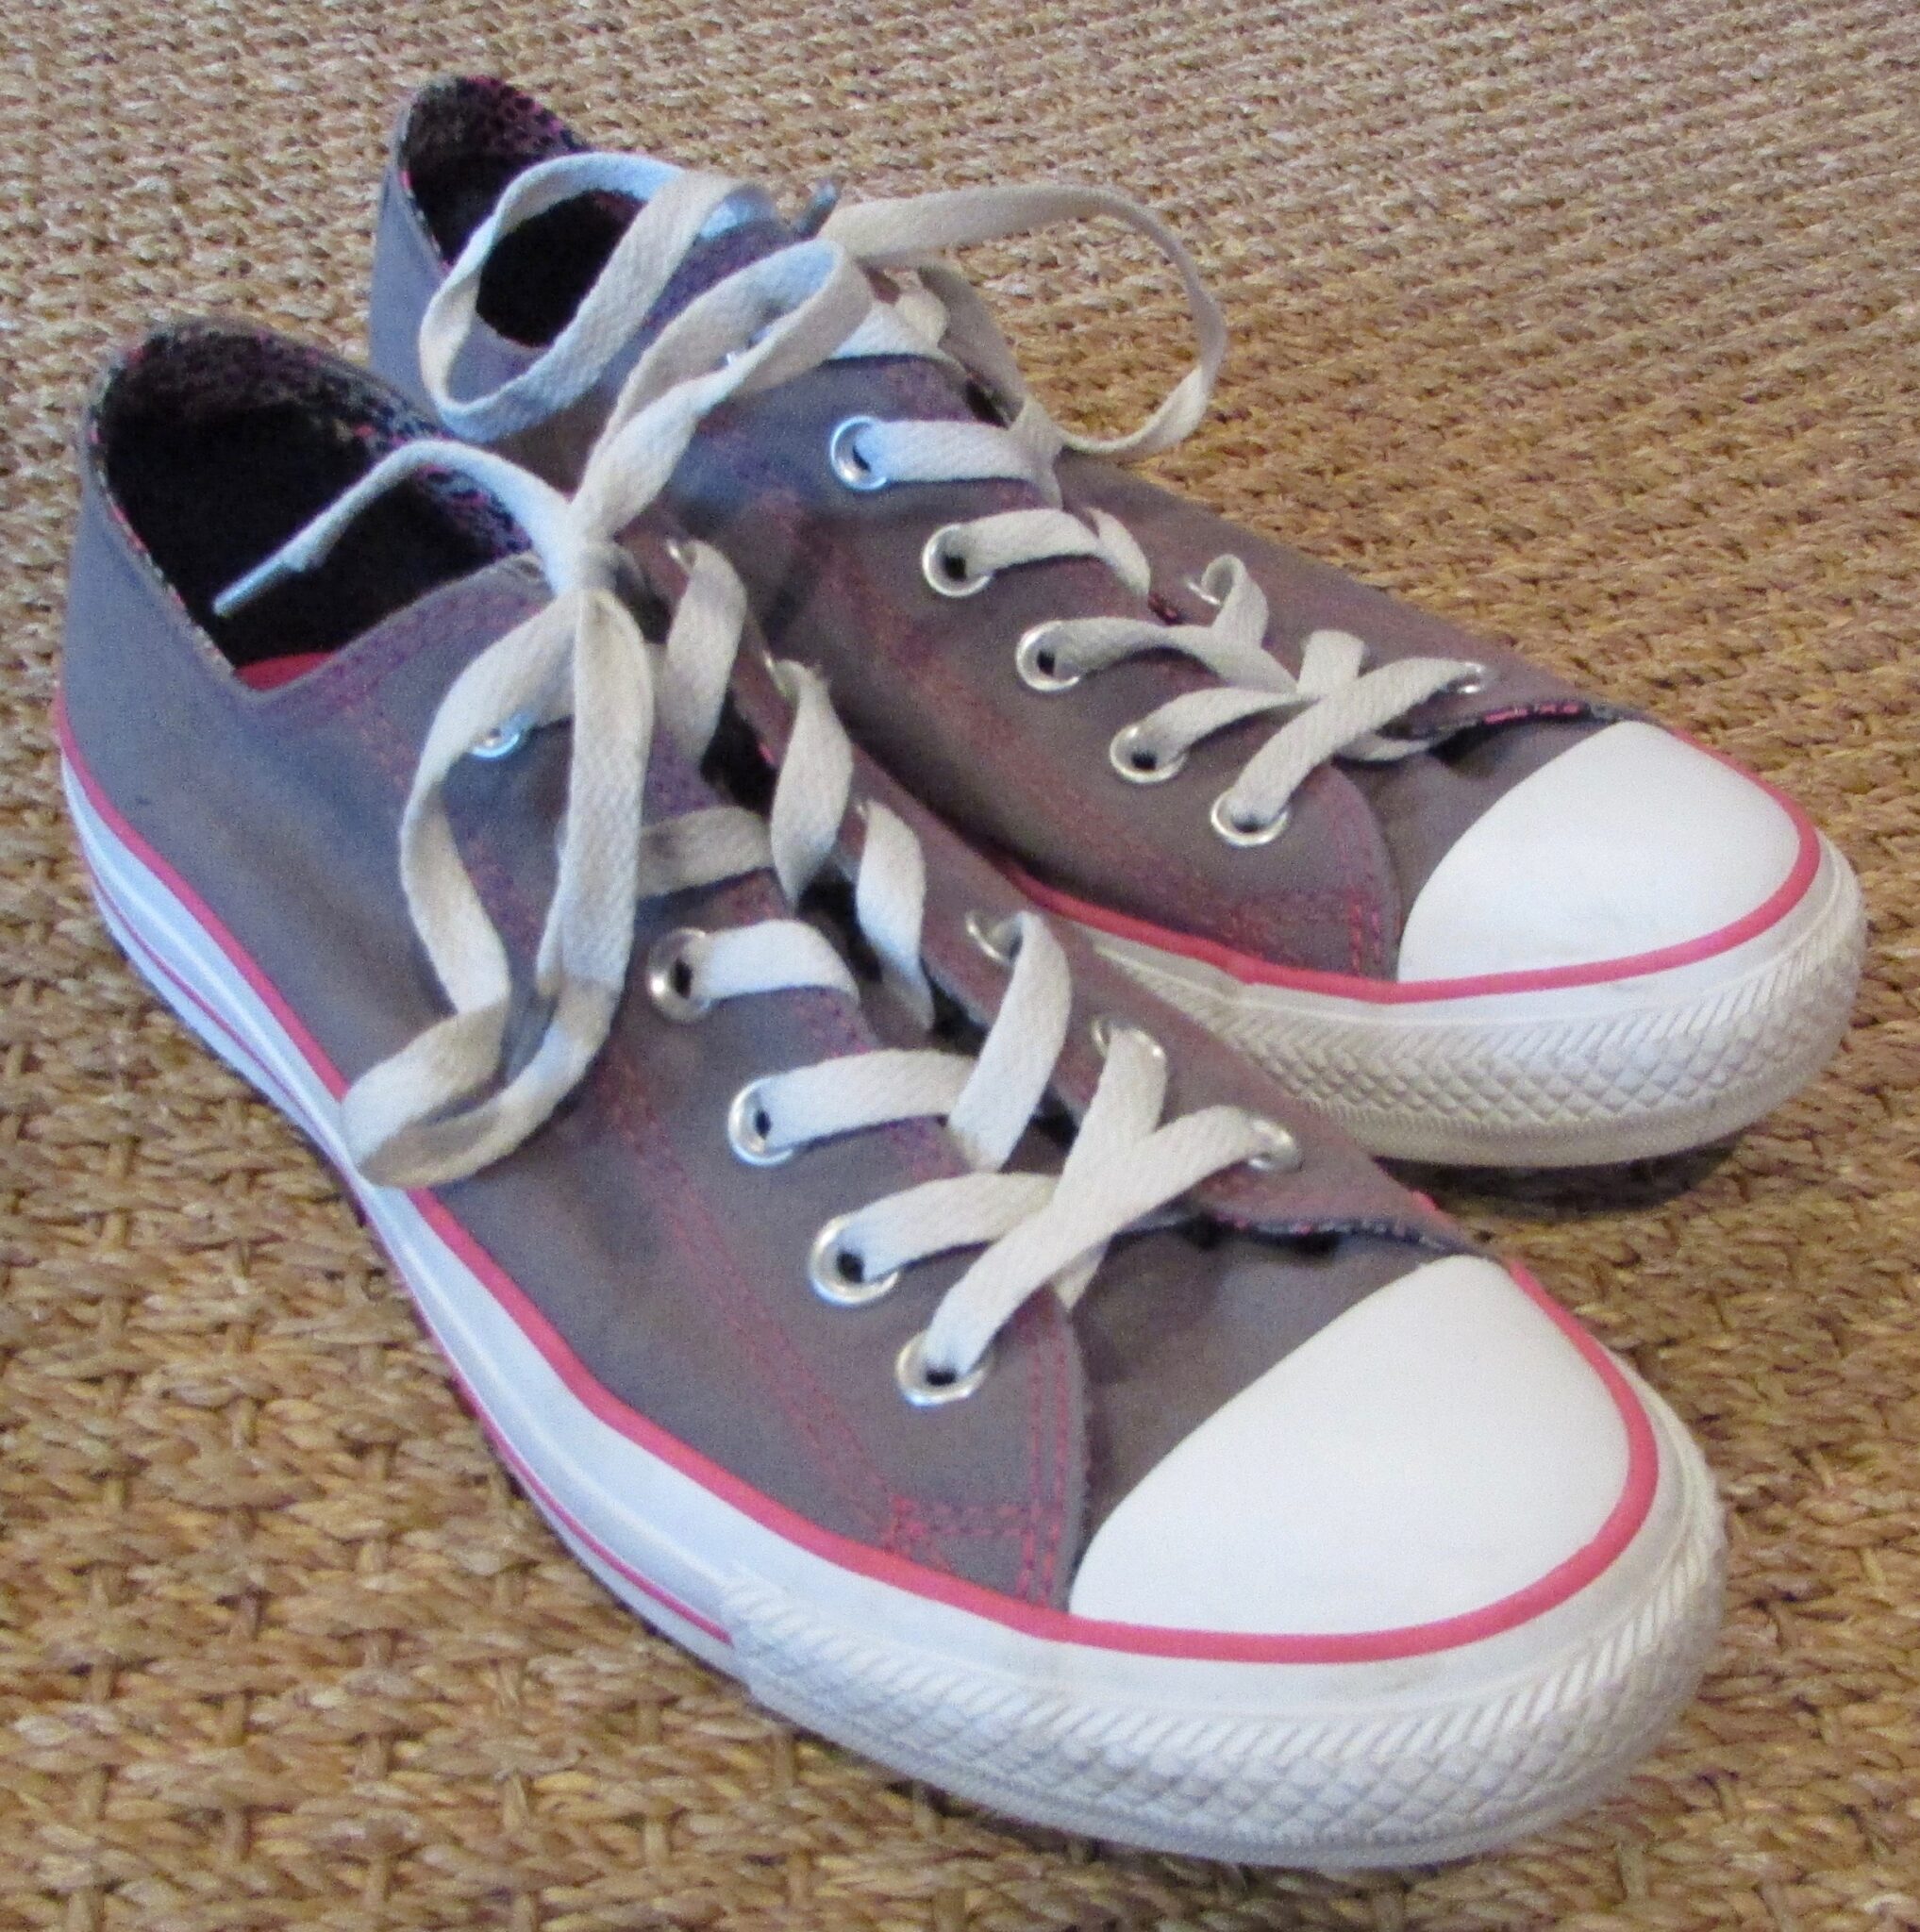 Converse CT All Stars Gray/Neon Pink Sneakers Women 9 - Heet On Your Feet